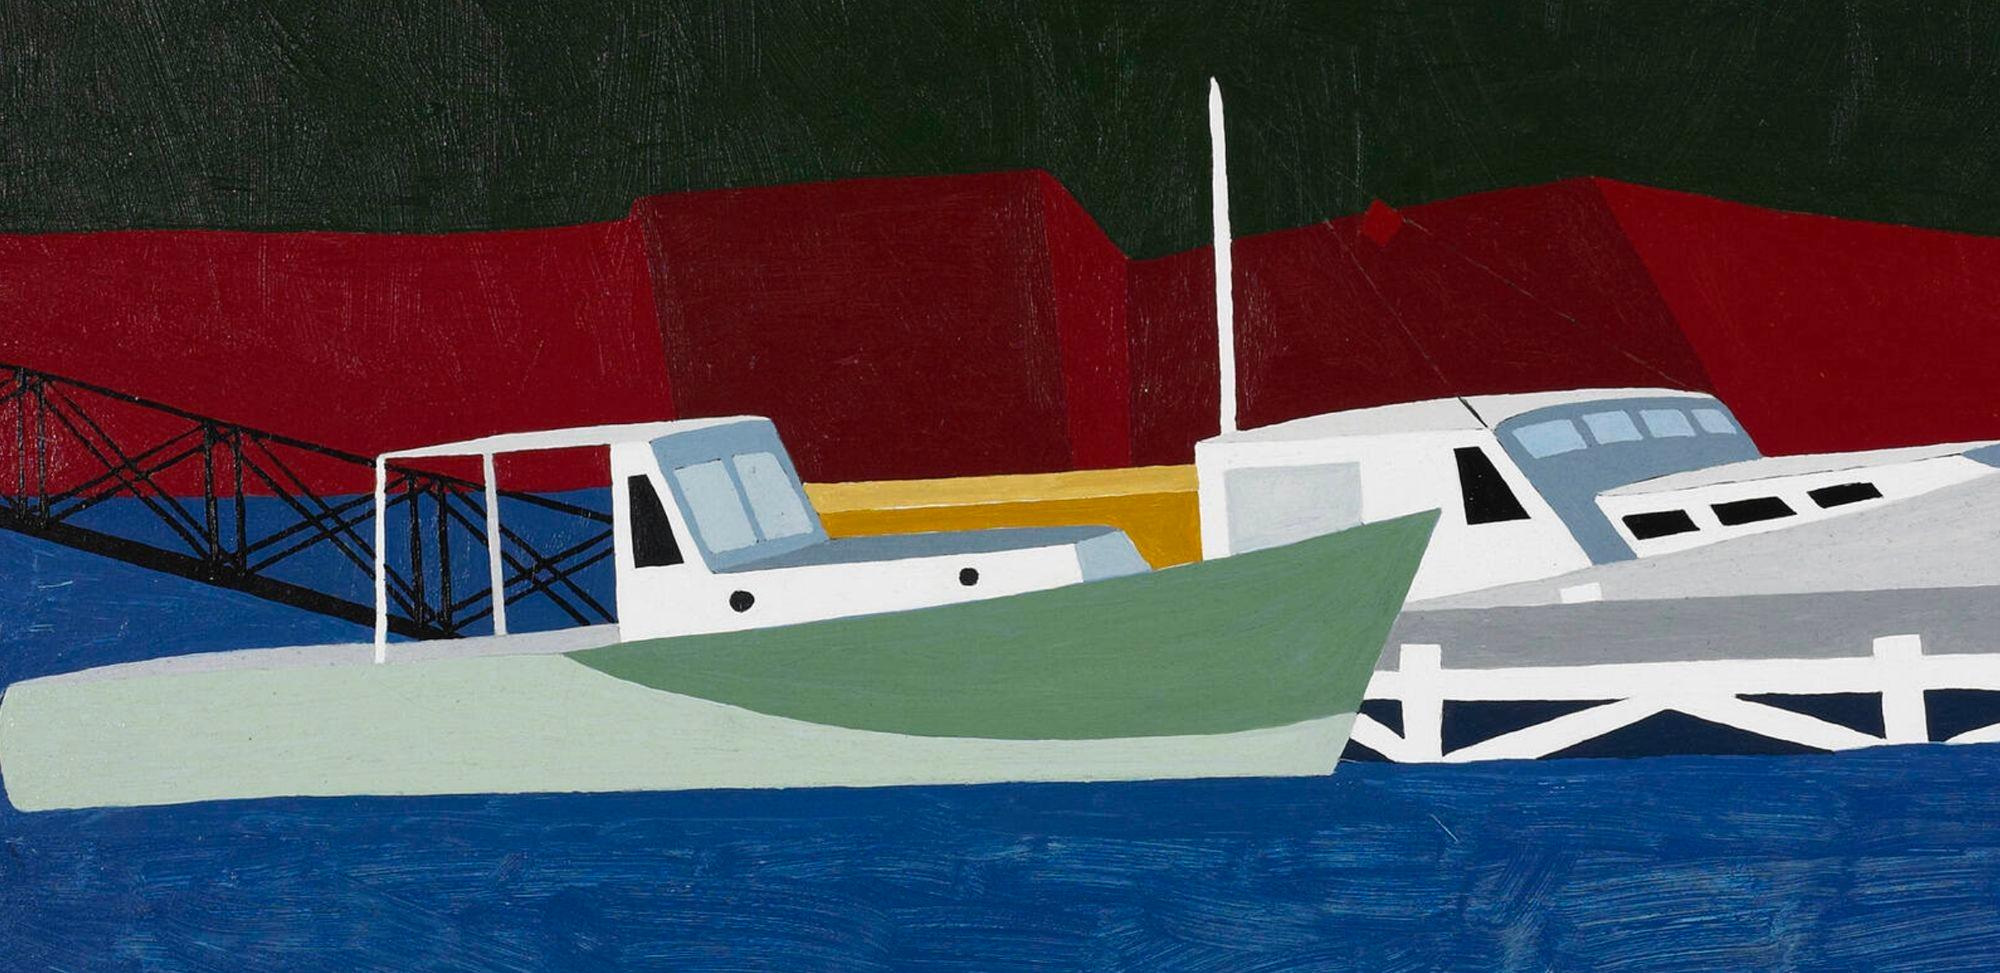 Robert Herrmann Boats Oil on Masonite. Seascape with boats and dock.
Signed and dated to verso 'R. Herrmann 56'
Robert Herrmann was an American painter who was born in 1922. MoMA, The Museum of Modern Art featured Robert Herrmann's work in the